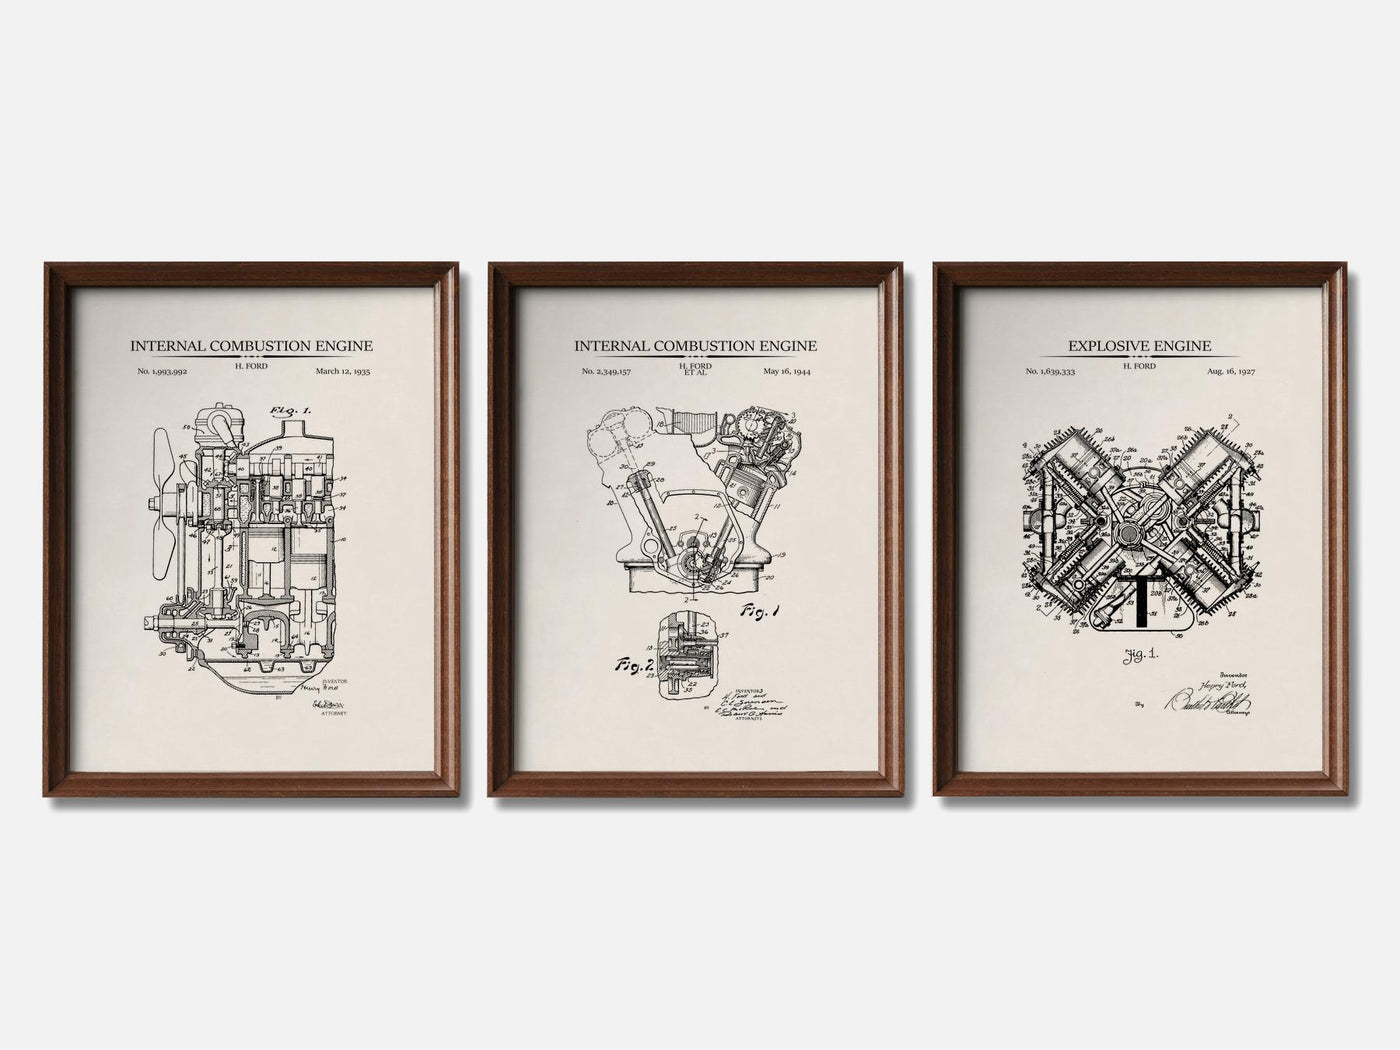 Henry Ford Patent Print Set of 3 mockup - A_t10072-V1-PC_F+WA-SS_3-PS_11x14-C_ivo variant